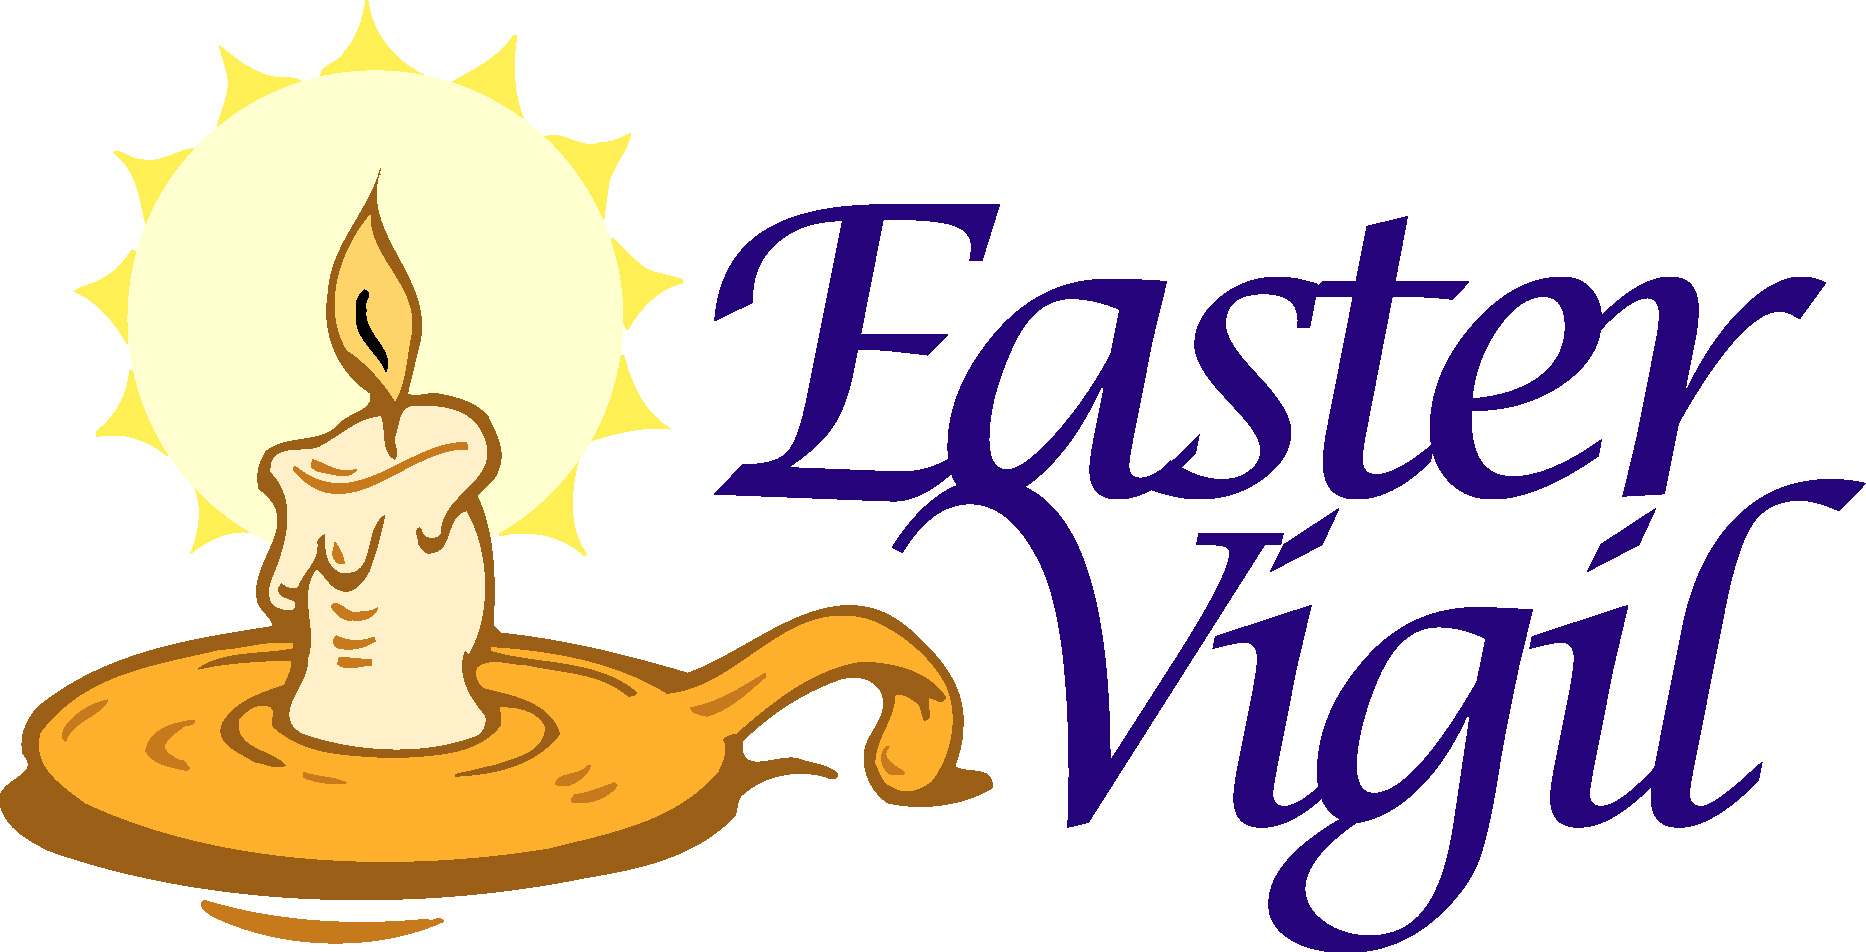 Interesting free candle clip. Candles clipart easter vigil